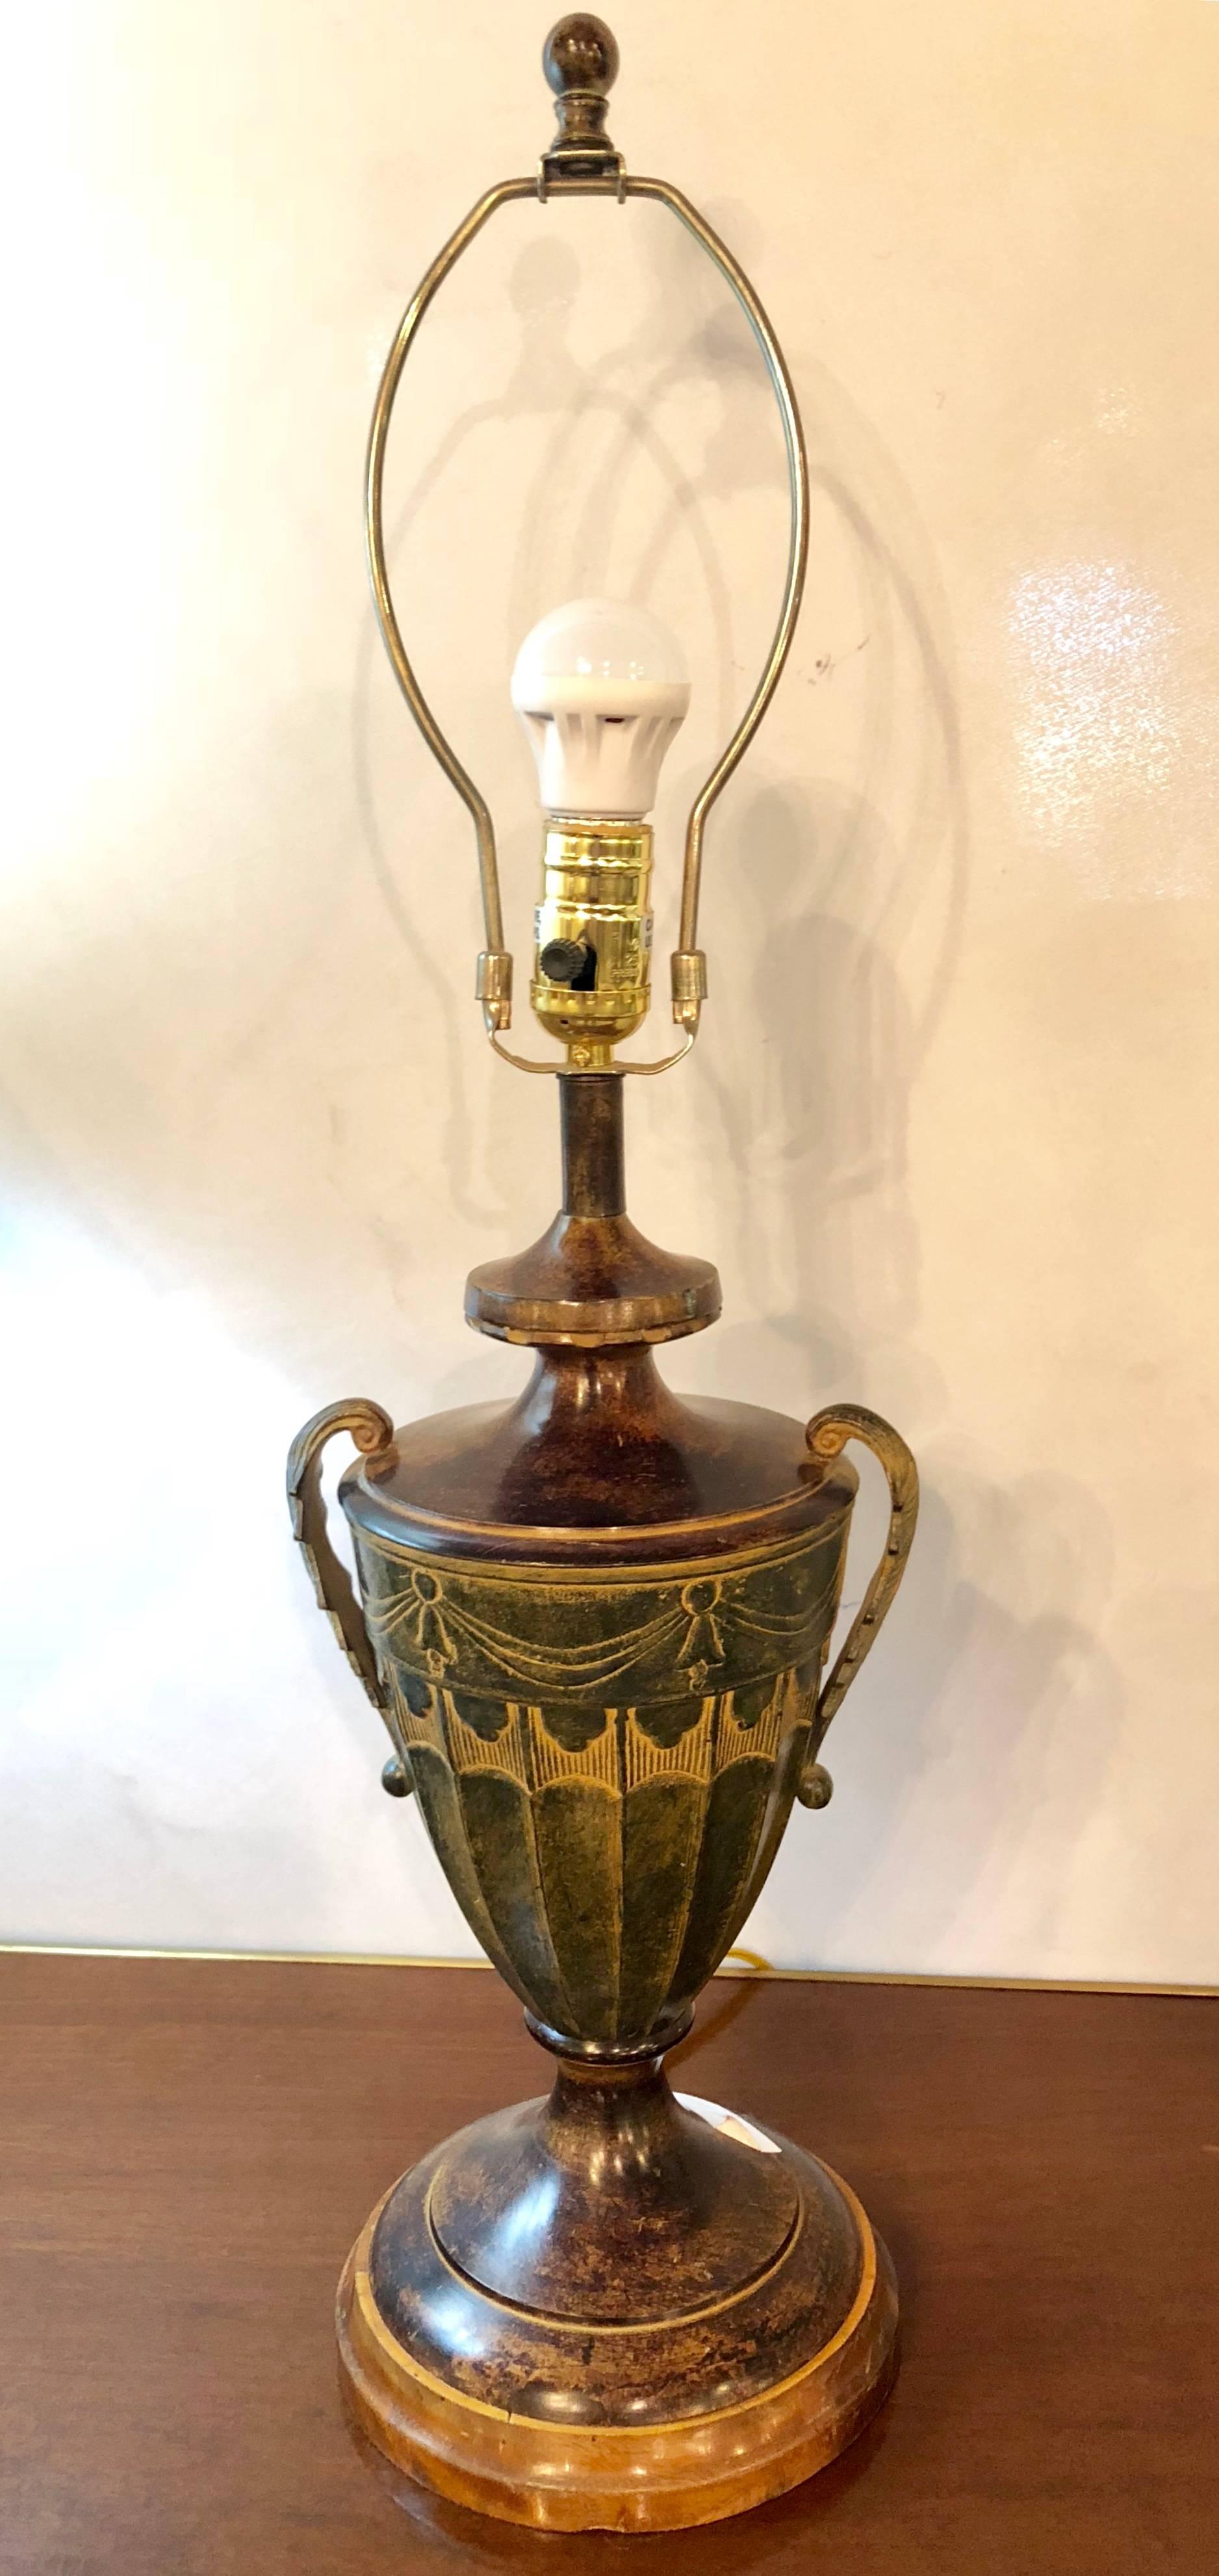 Hollywood Regency Pair Mid-Century Modern Urn Form Gilt Painted Twin Handled Aladdin Table Lamps